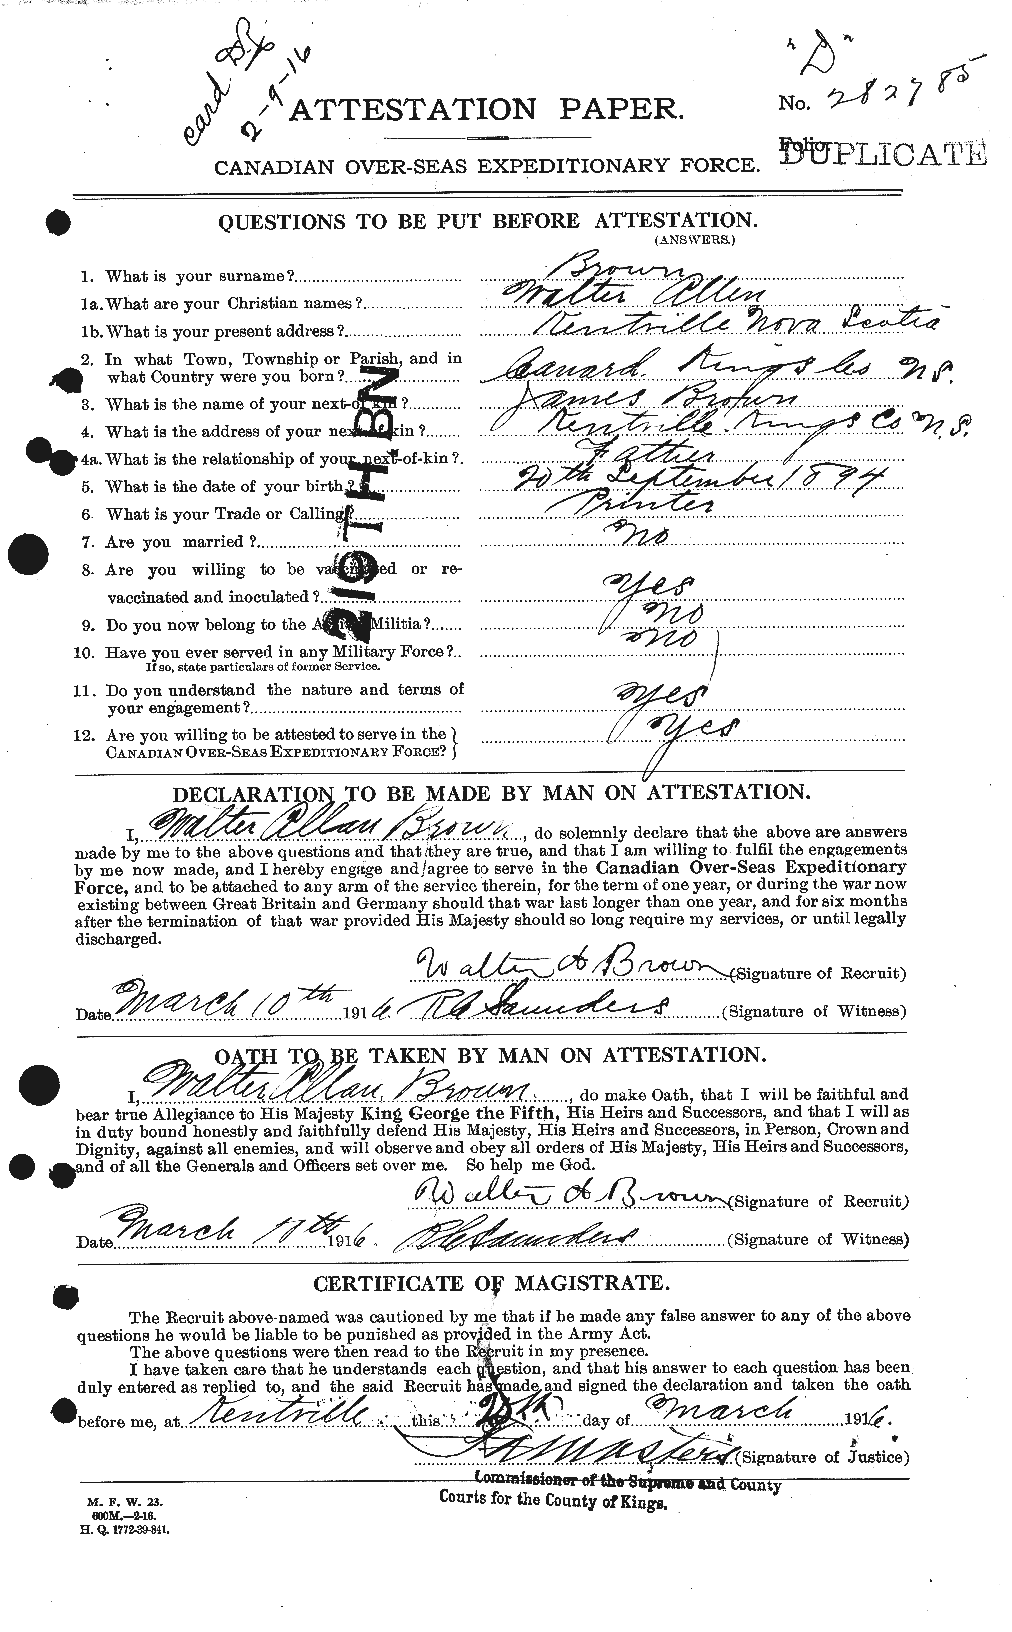 Personnel Records of the First World War - CEF 266656a